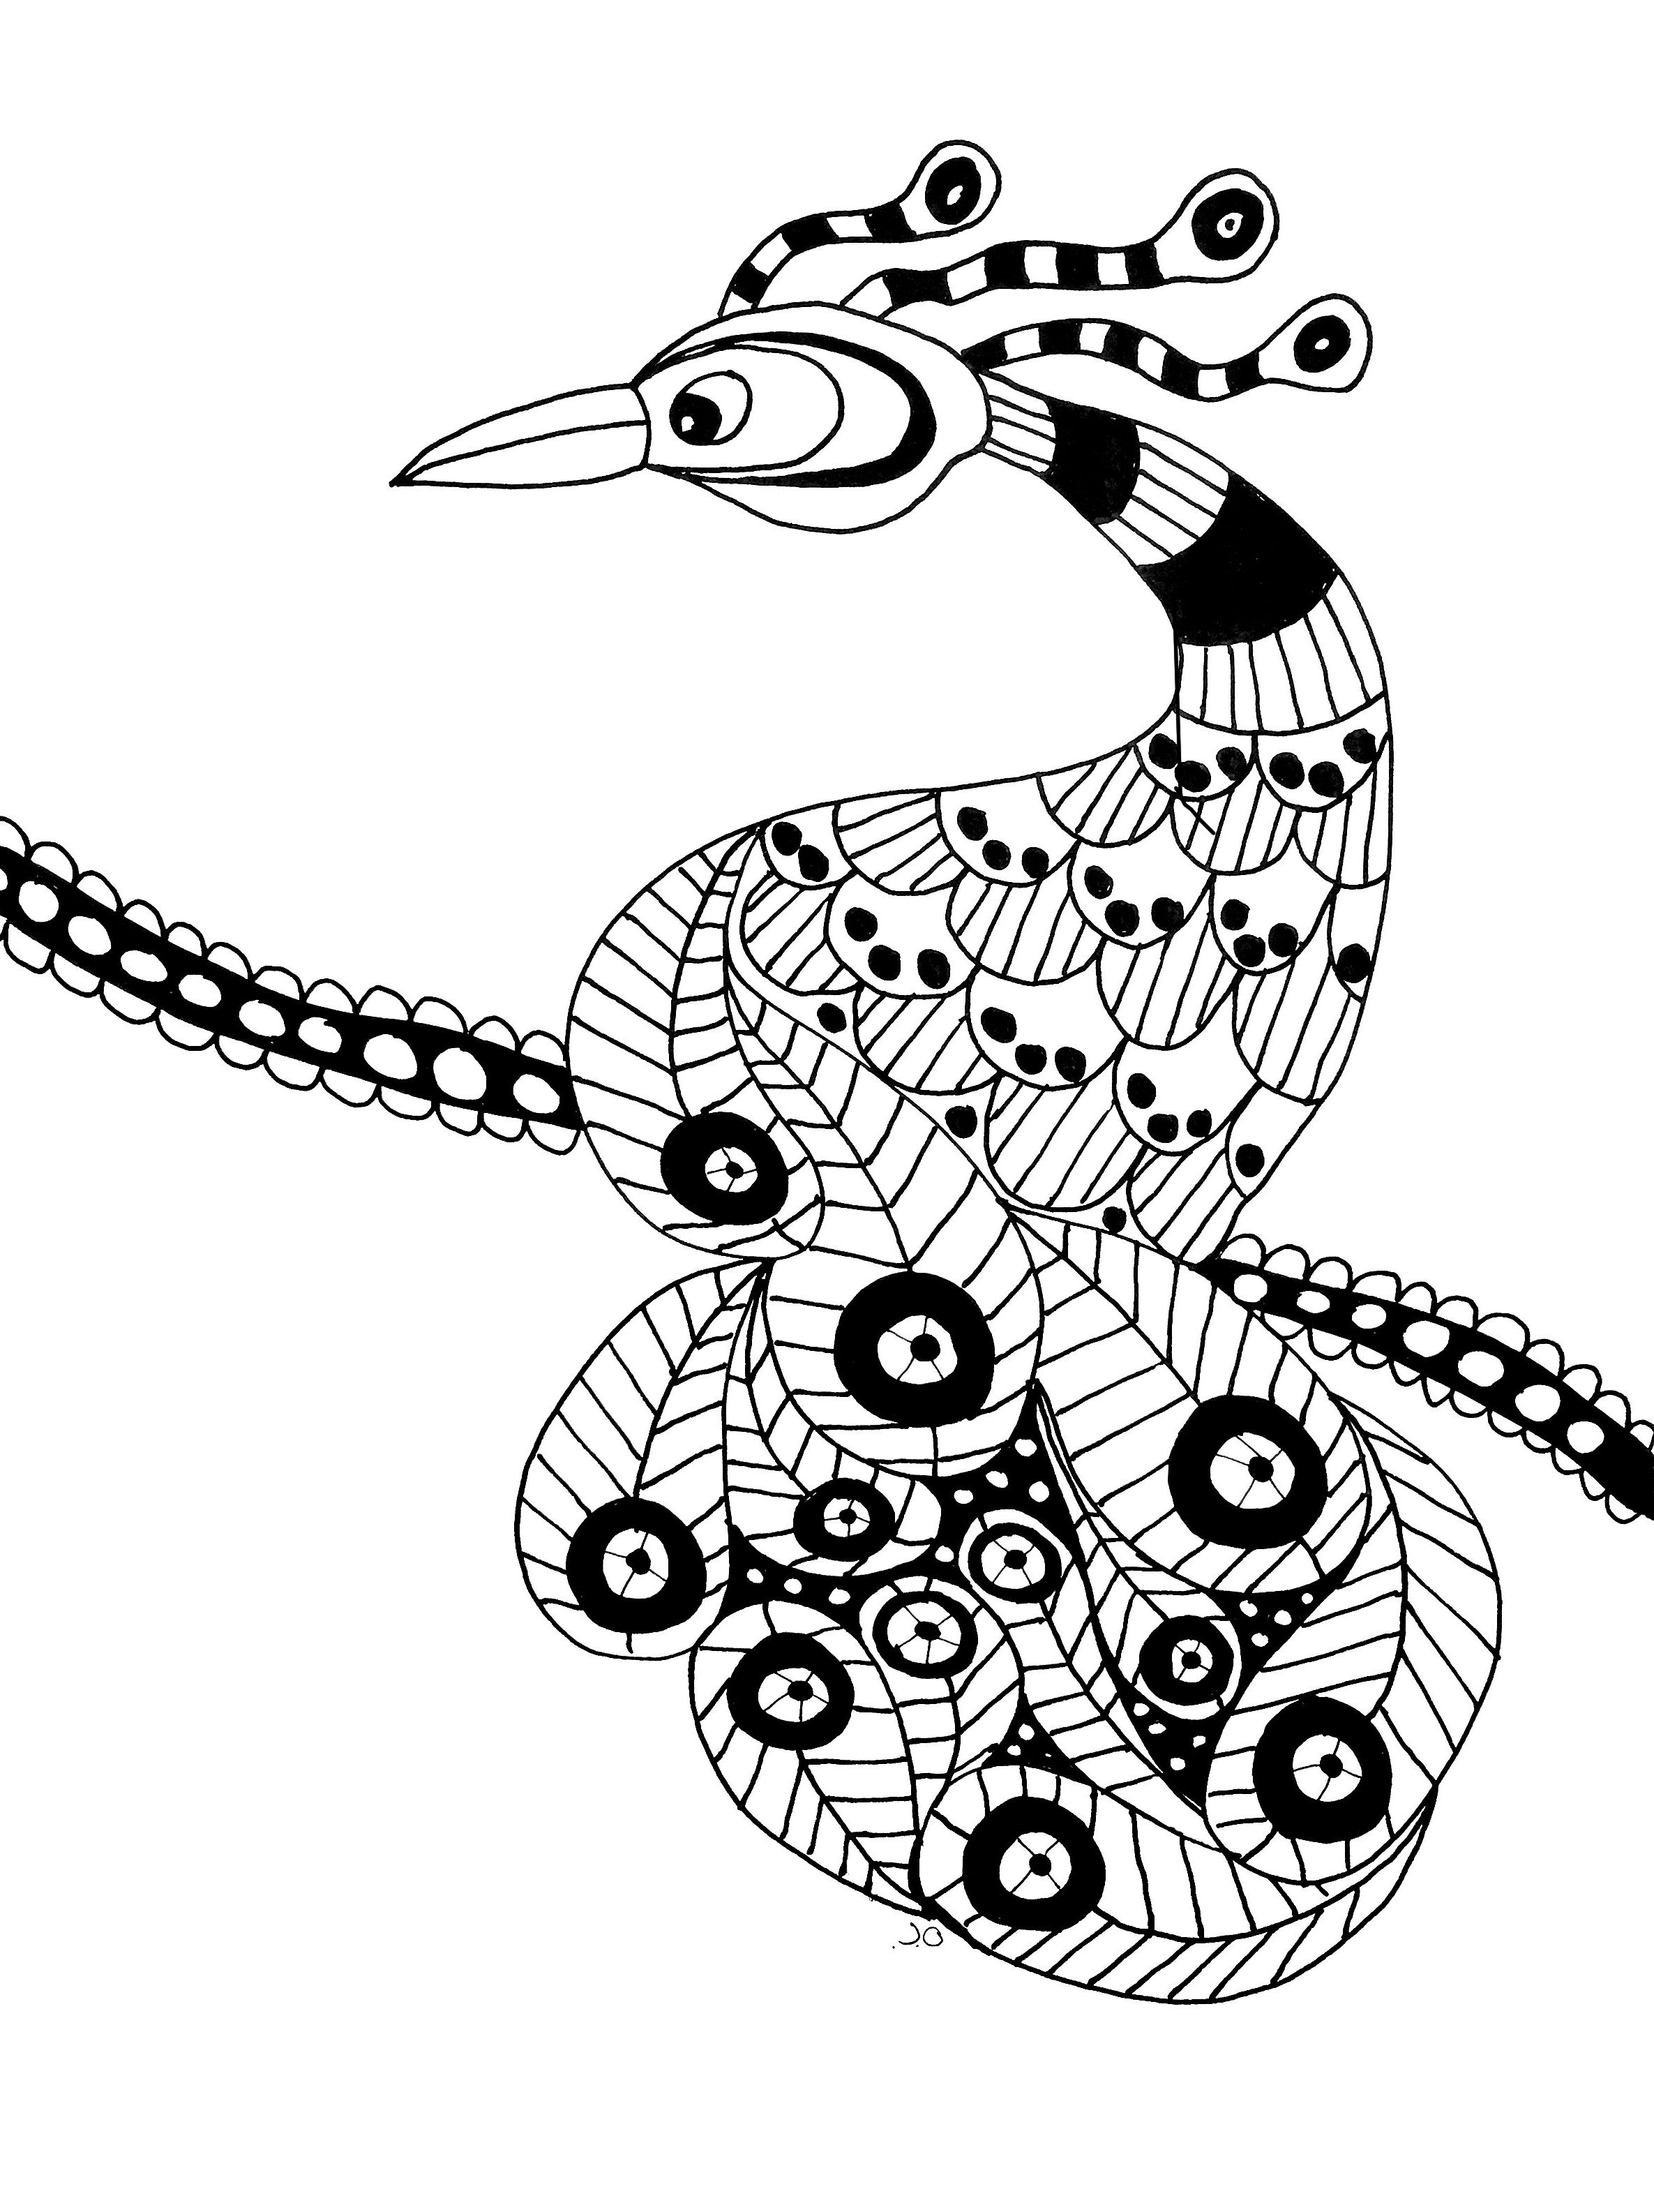 Extraordinary bird. A coloring page with simple motifs inspired by the Zentangle method, Artist : Olivier